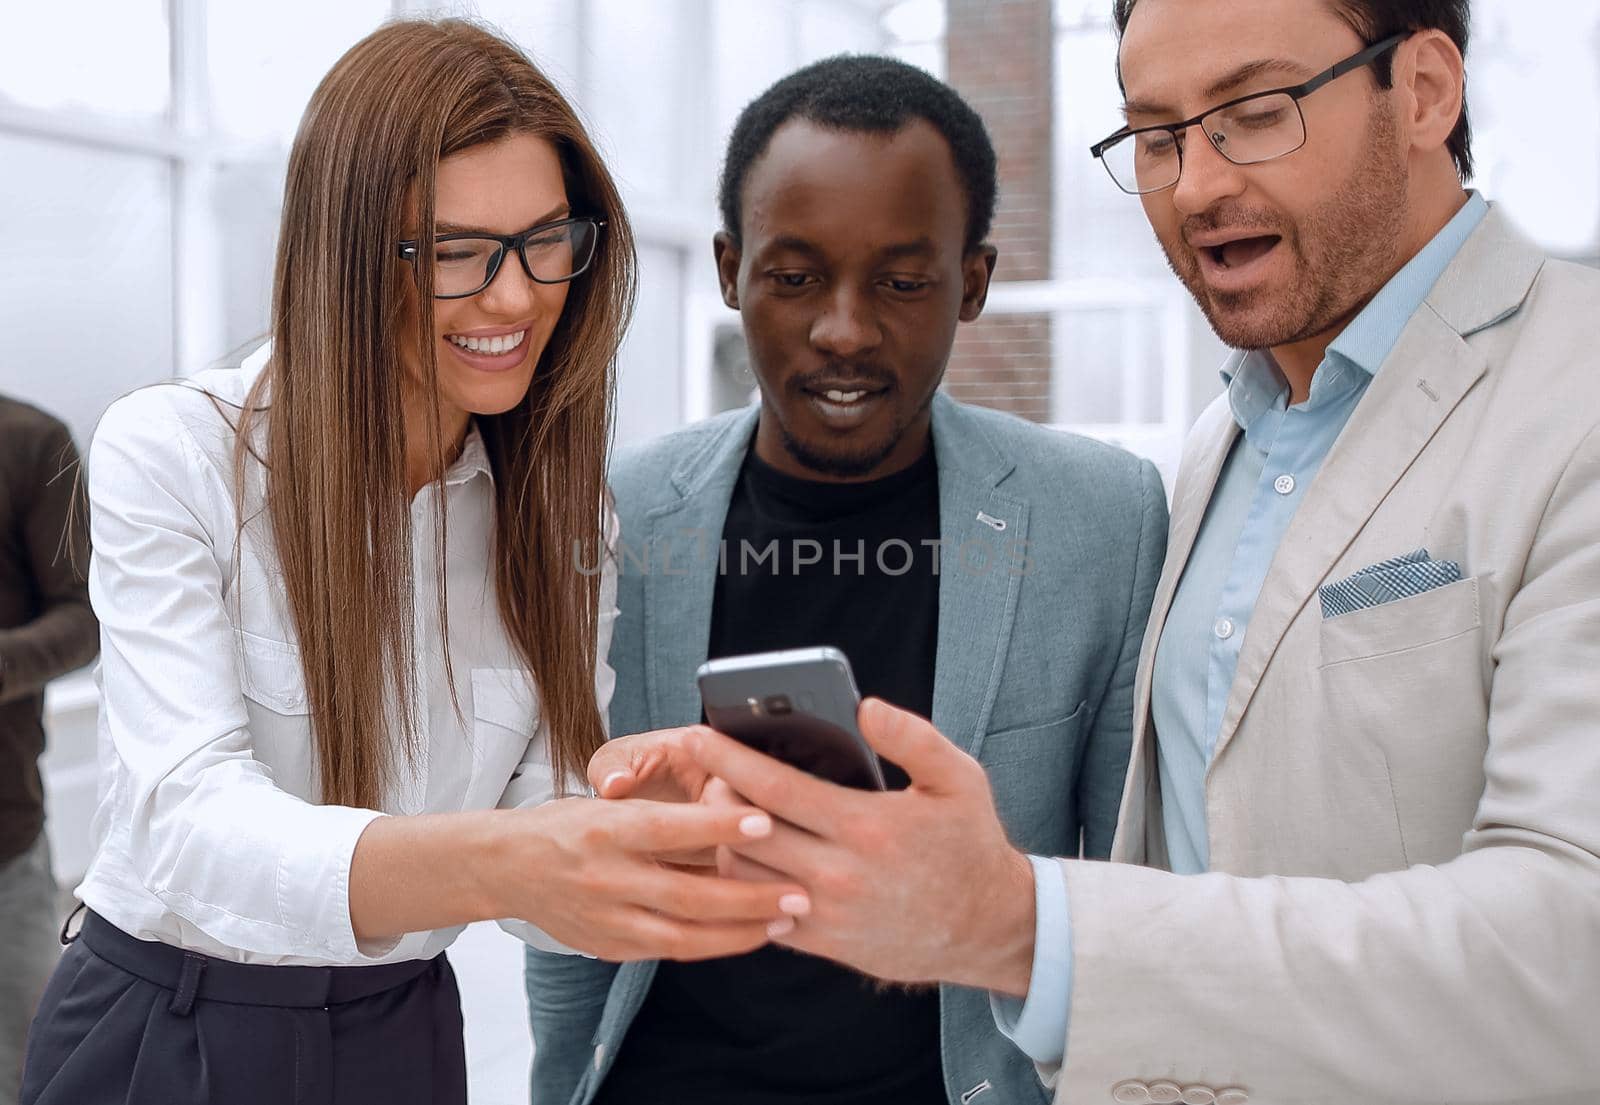 smiling colleagues looking at the smartphone screen, standing in a modern office